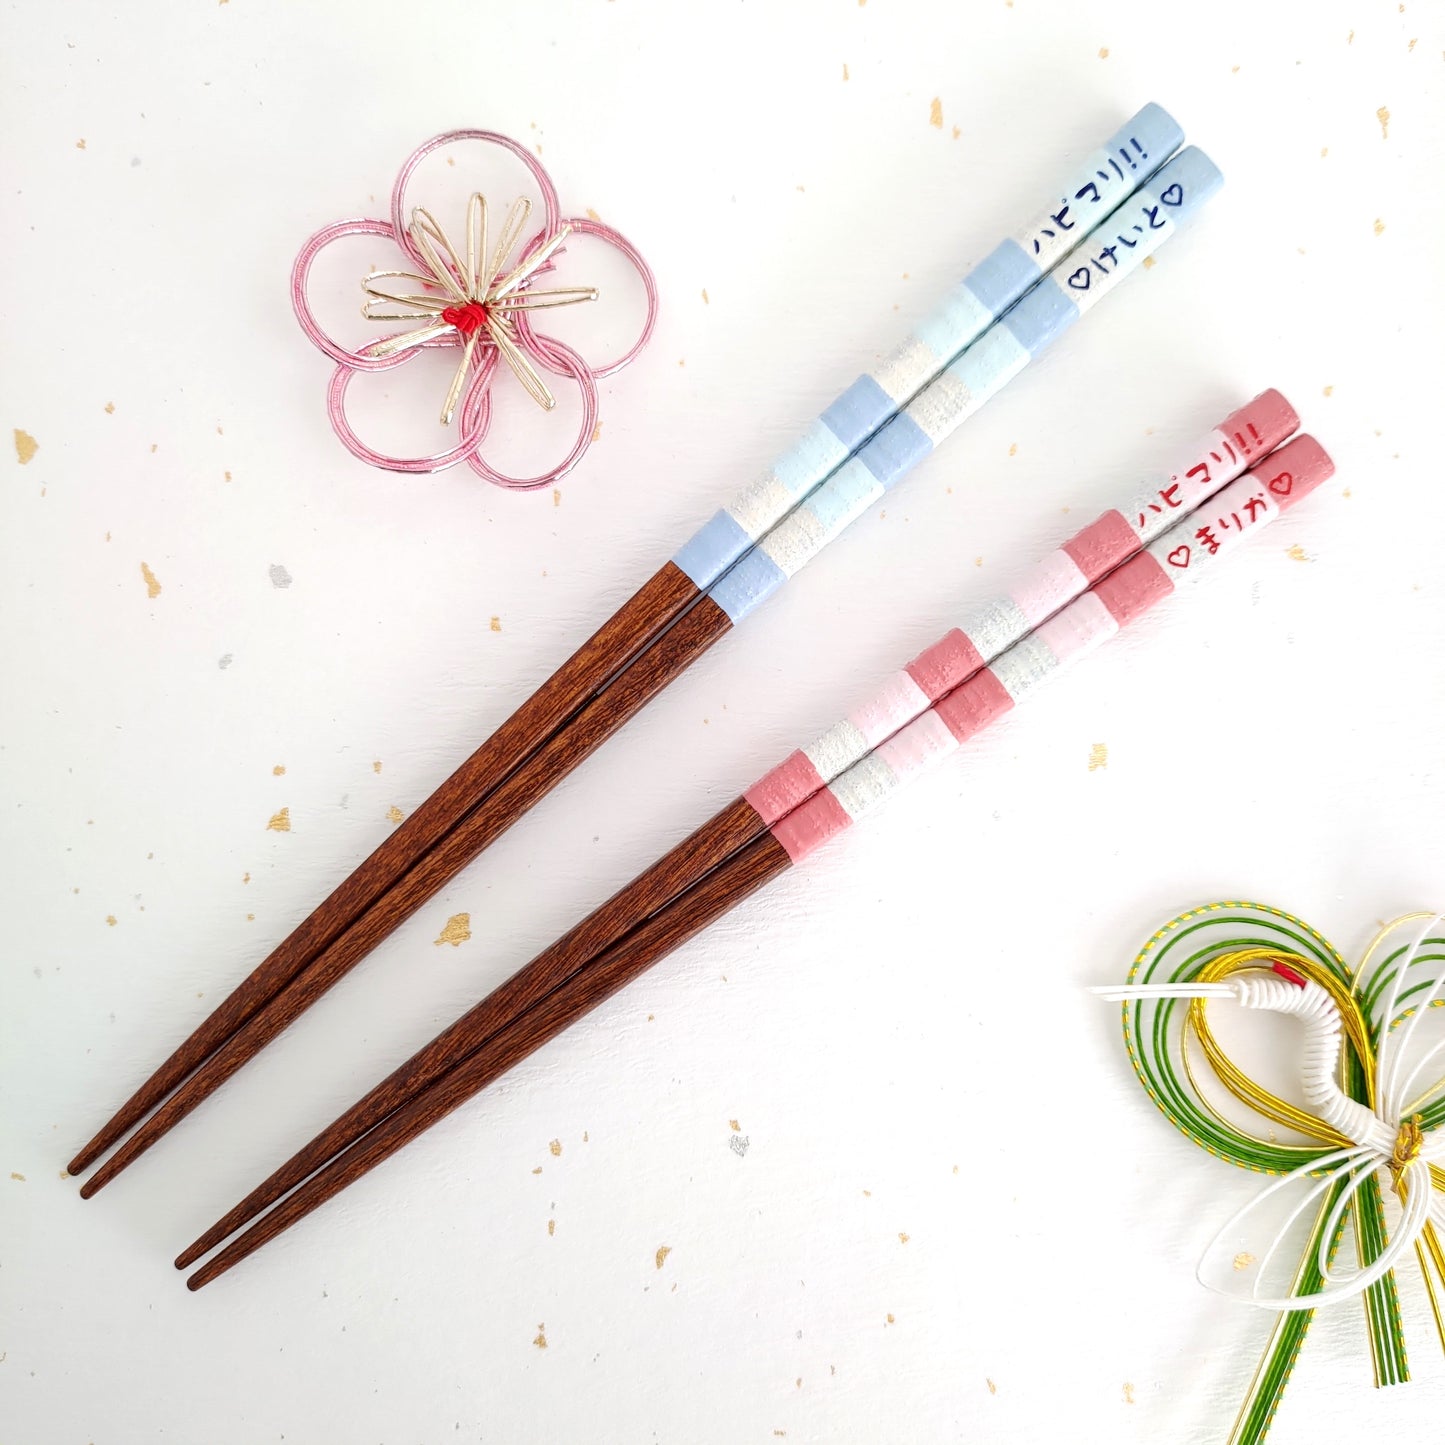 Beautiful Japanese chopsticks with milky stripes design blue pink - DOUBLE PAIR